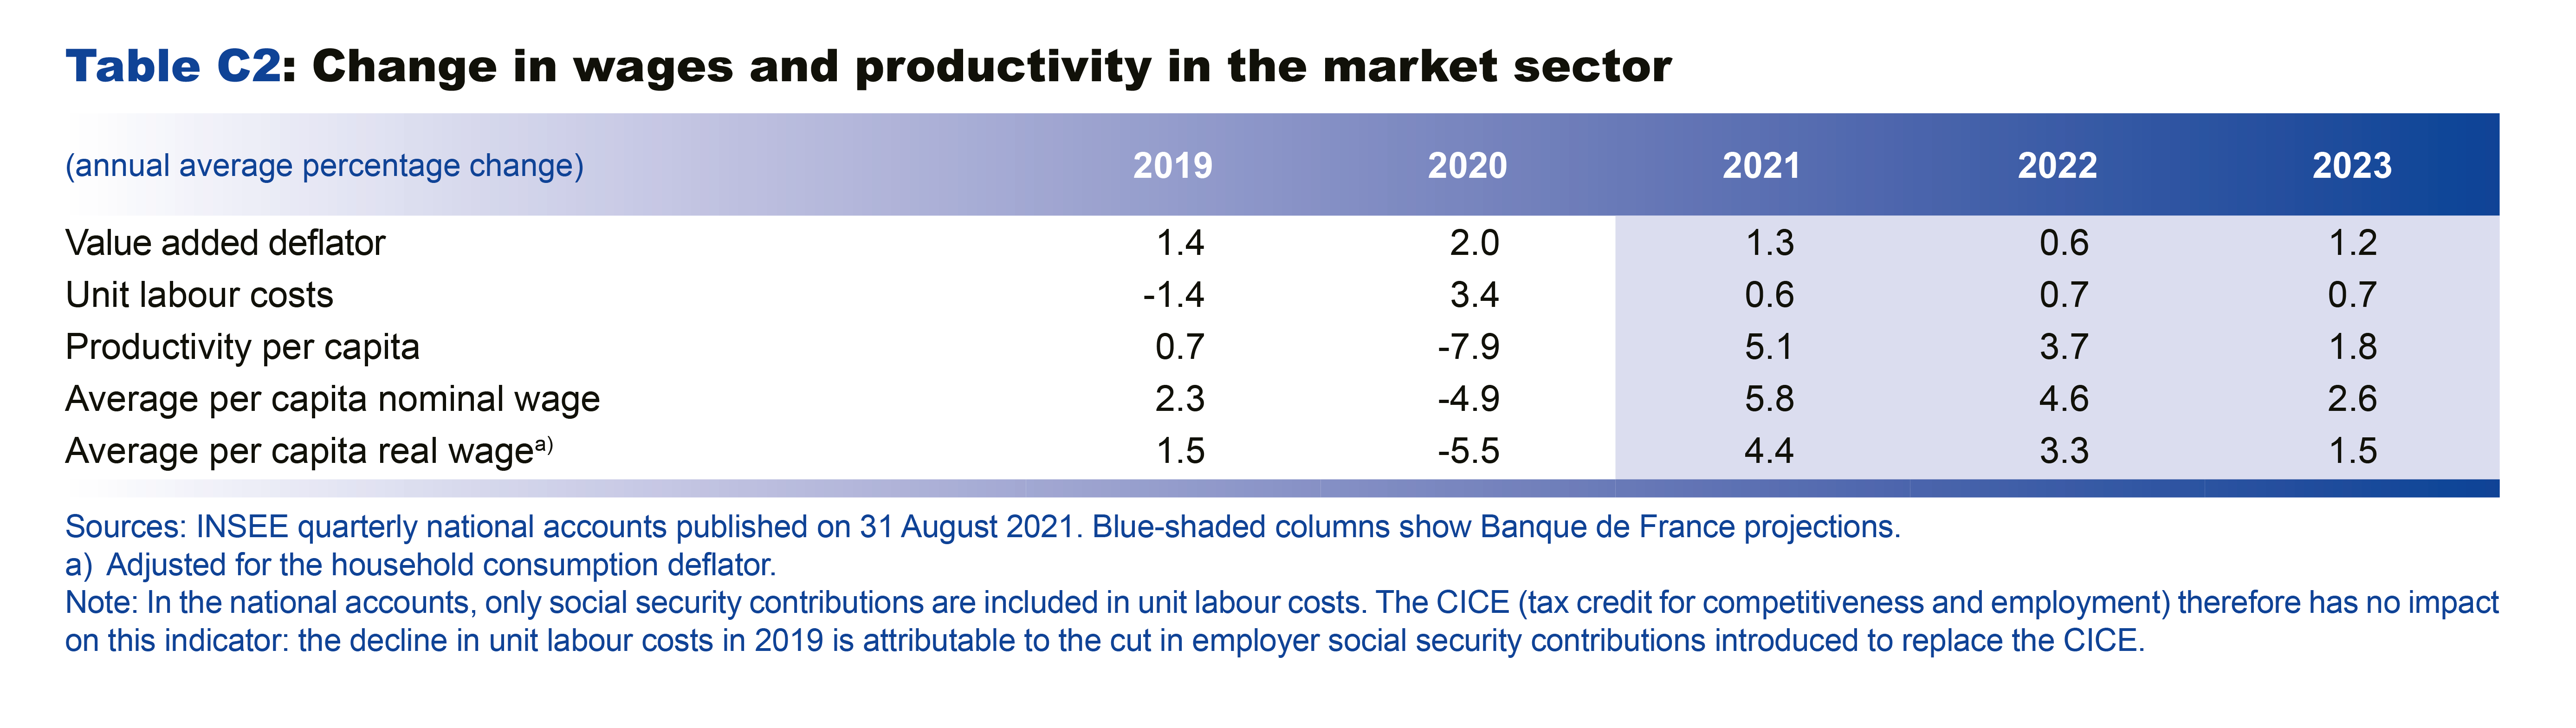 Macroeconomic projections – September 2021 - Change in wages and procudtivity in the market sector